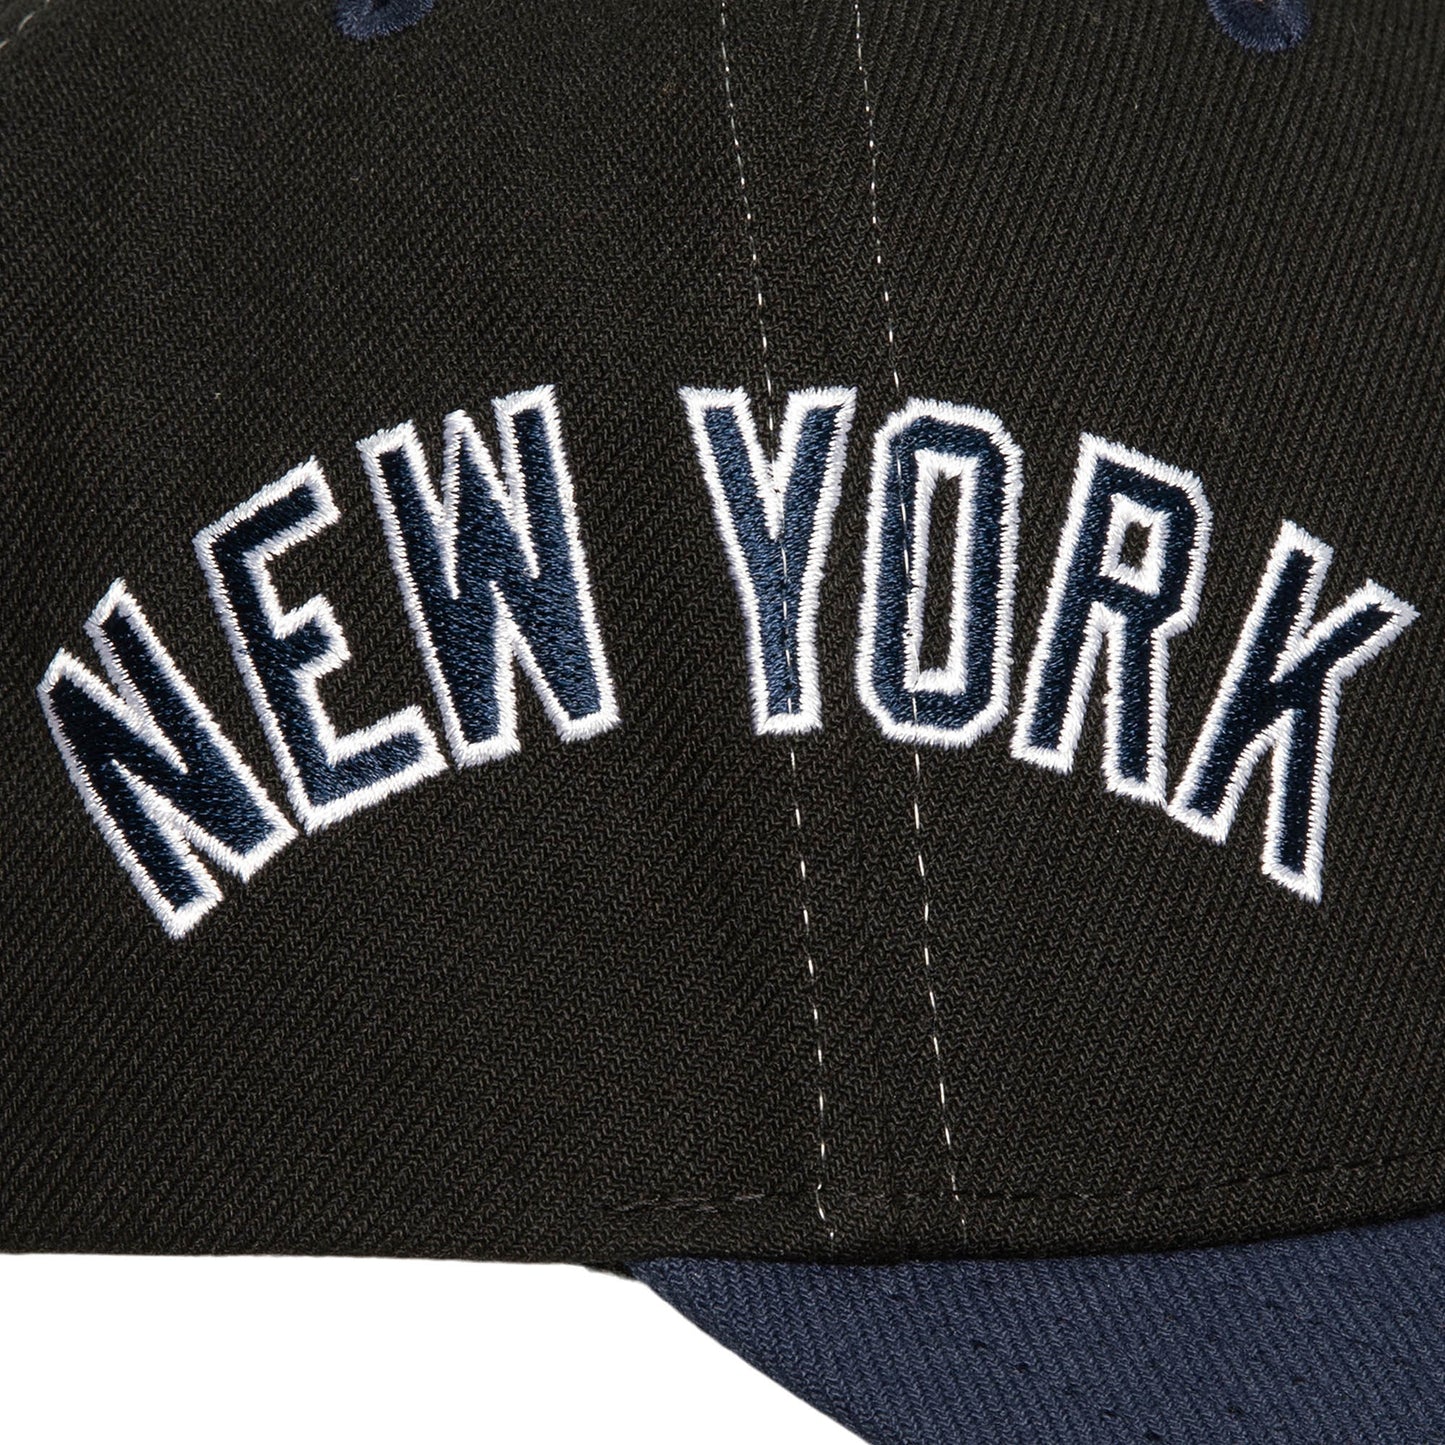 New York Yankees Mitchell & Ness Over Bite Pro Crown Snapback Hat